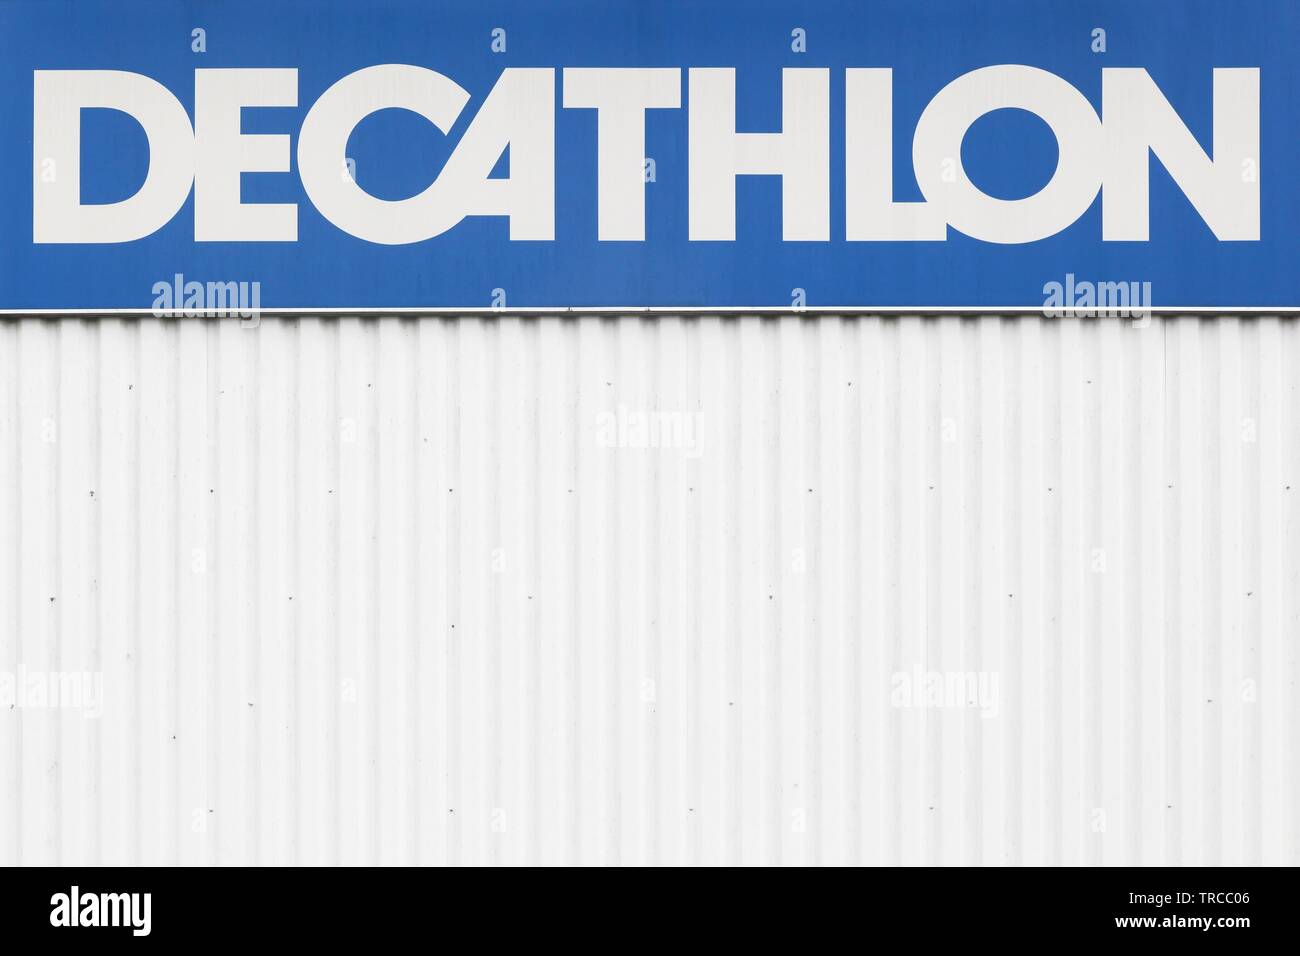 Villefranche, France - October 23, 2016:Decathlon sign on a wall. Decathlon is a french company and one of the world's largest sporting goods retailer Stock Photo